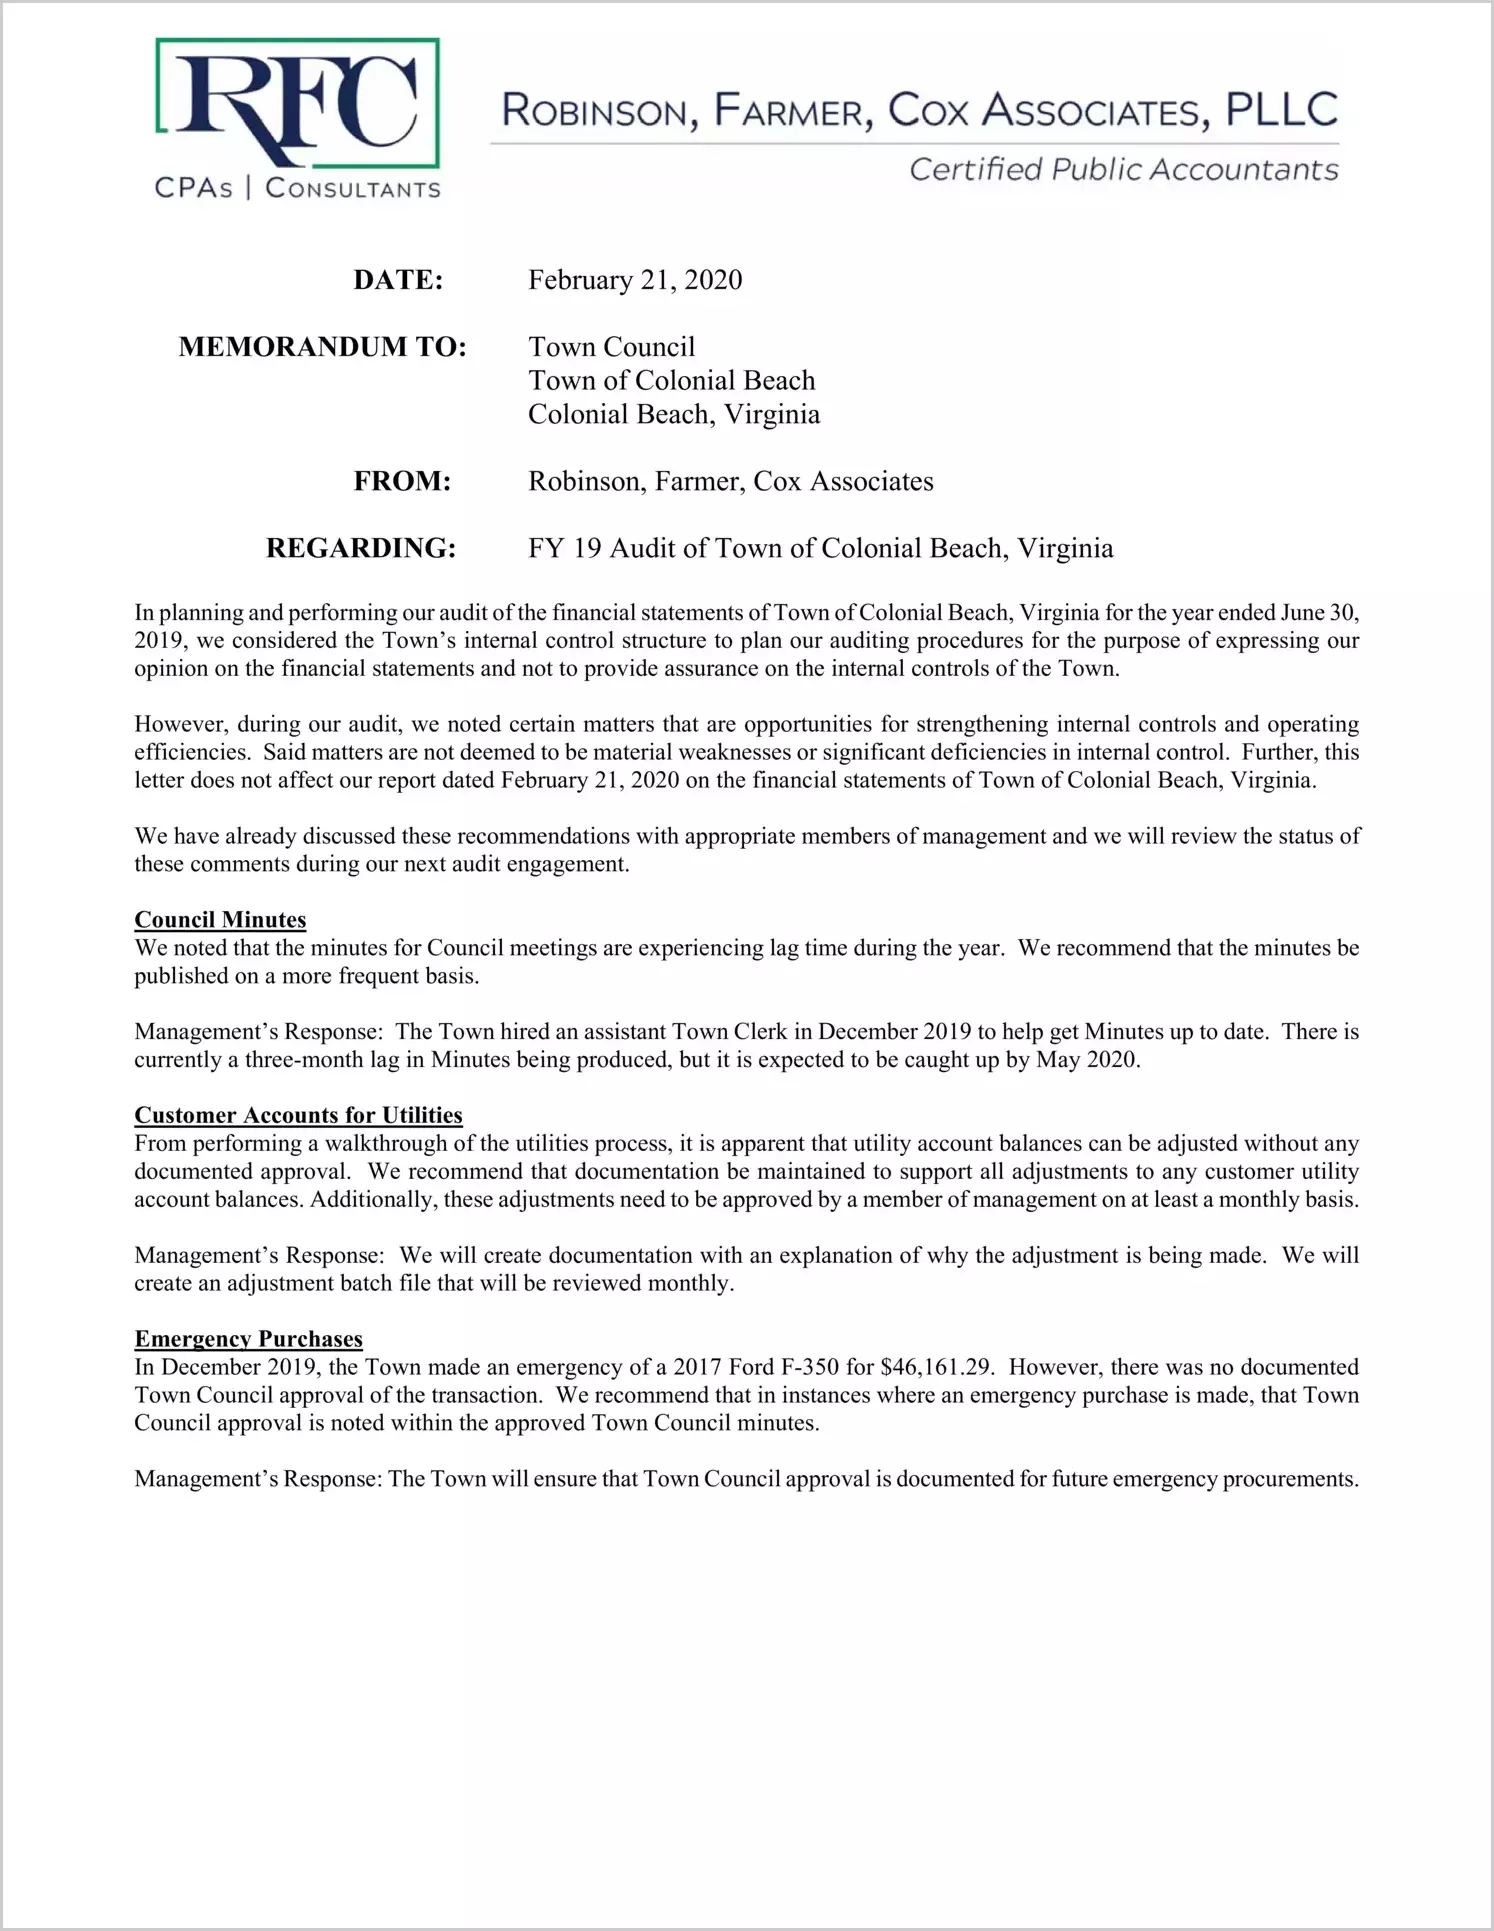 2019 Management Letter for Town of Colonial Beach 